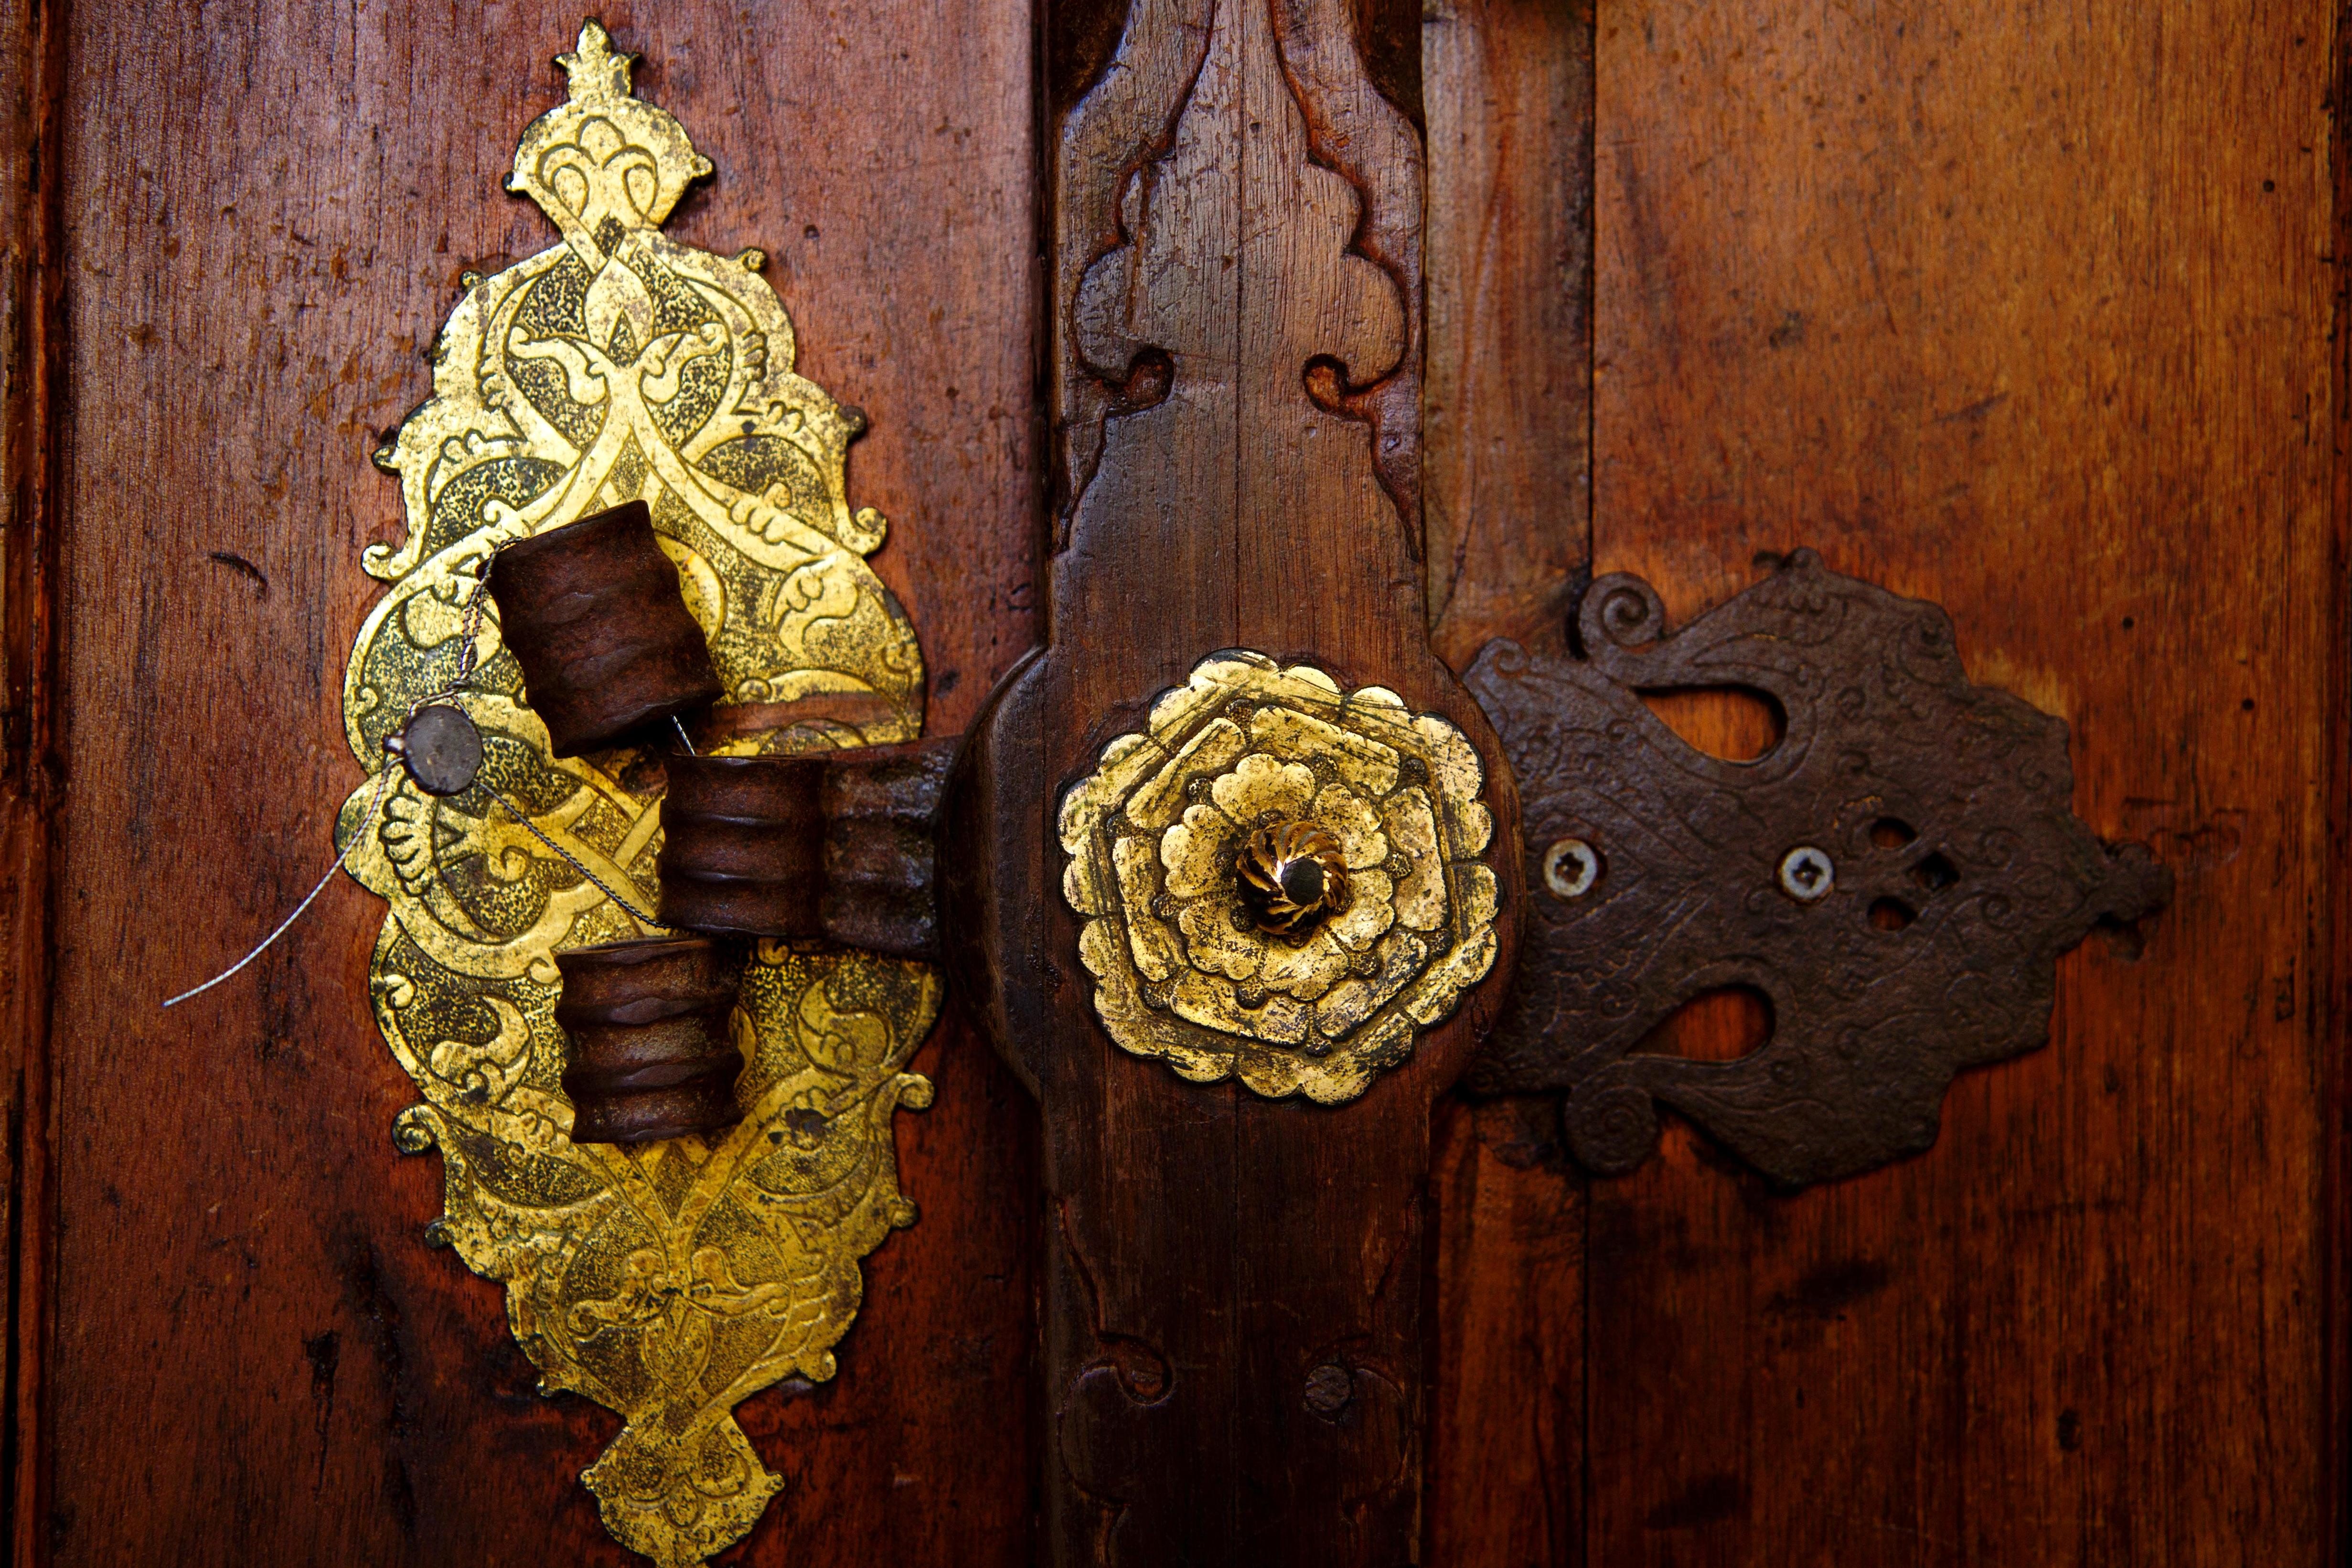 Free picture: antique, crafts, door handle, palace, Istanbul, Turkey, old, gold